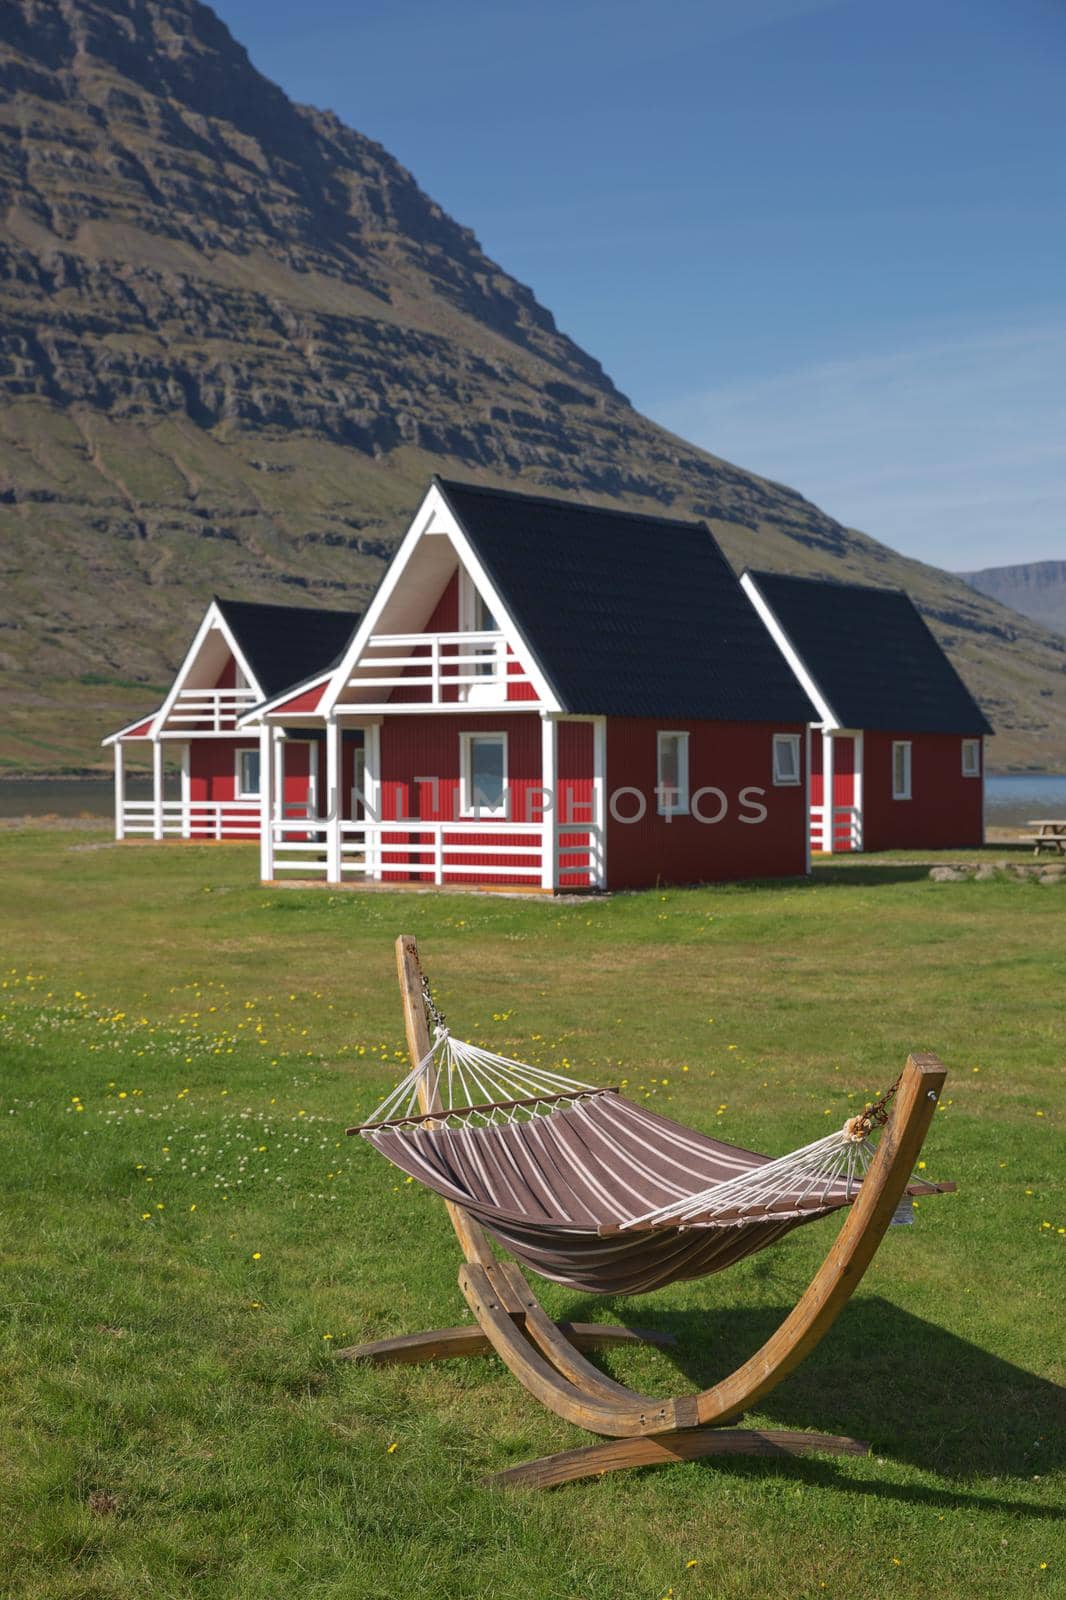 Traditional red painted wooden panel house with mighty Holmatindur mountain in the background in Eskifjordur, East Iceland by wondry